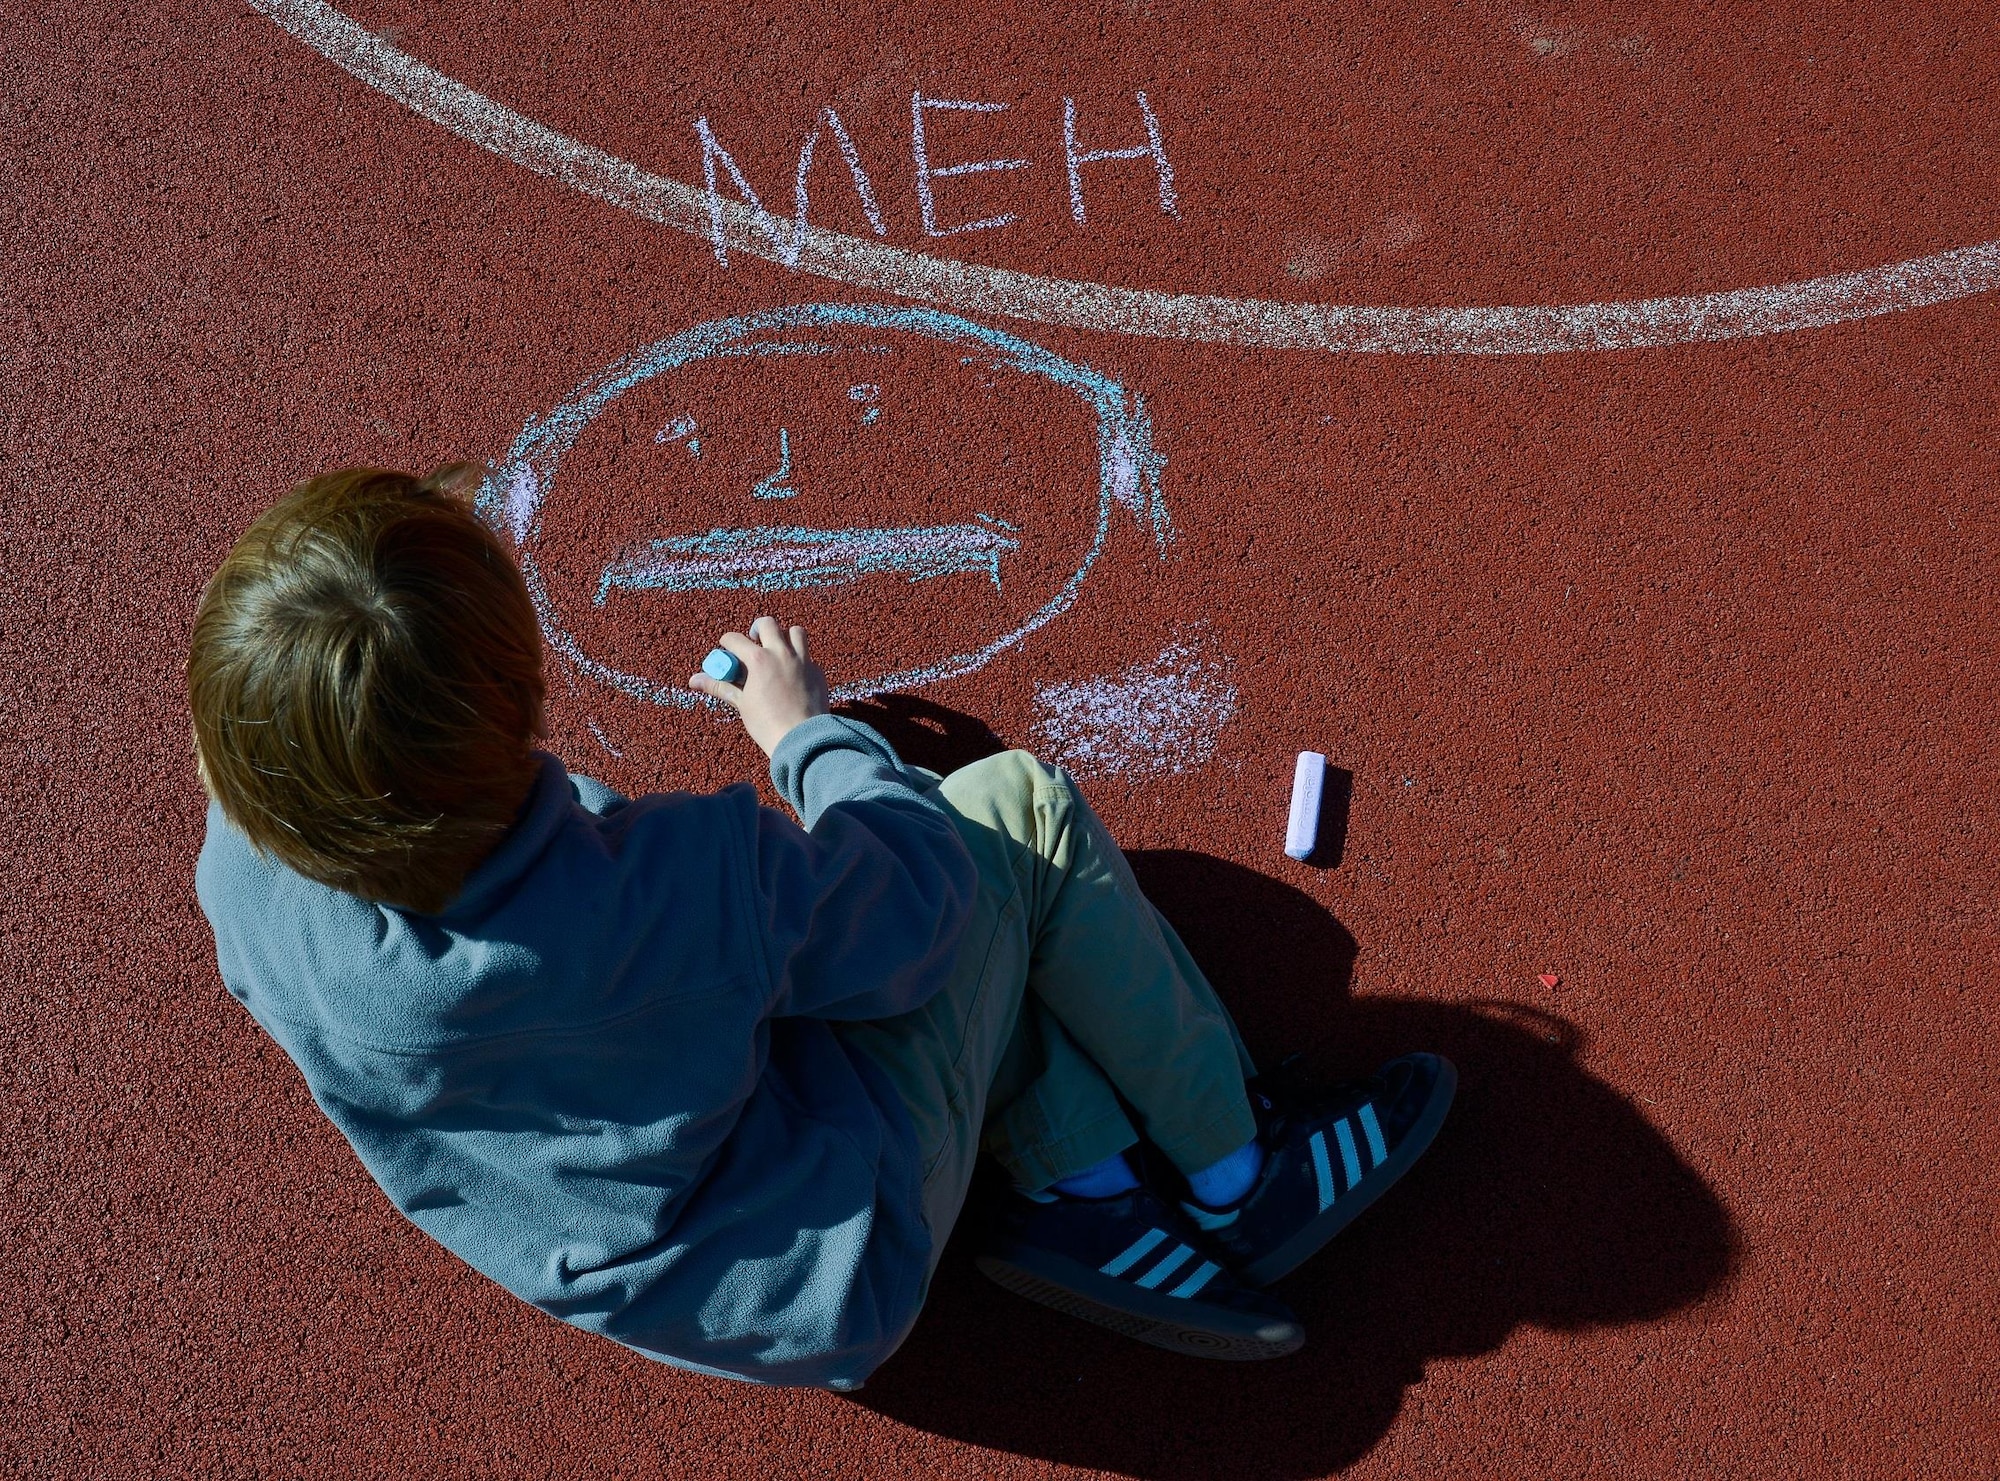 A child at Vogelweh Elementary School draws out his emotions during a therapy session April 21, 2016, at Vogelweh Air Base, Germany. Students who were separated from members of their families during the departure from Turkey and transitioned to Vogelweh schools undergo therapy to help them cope with any stress and anxiety issues they may have. (U.S. Air force photo/Airman 1st Class Lane T. Plummer)